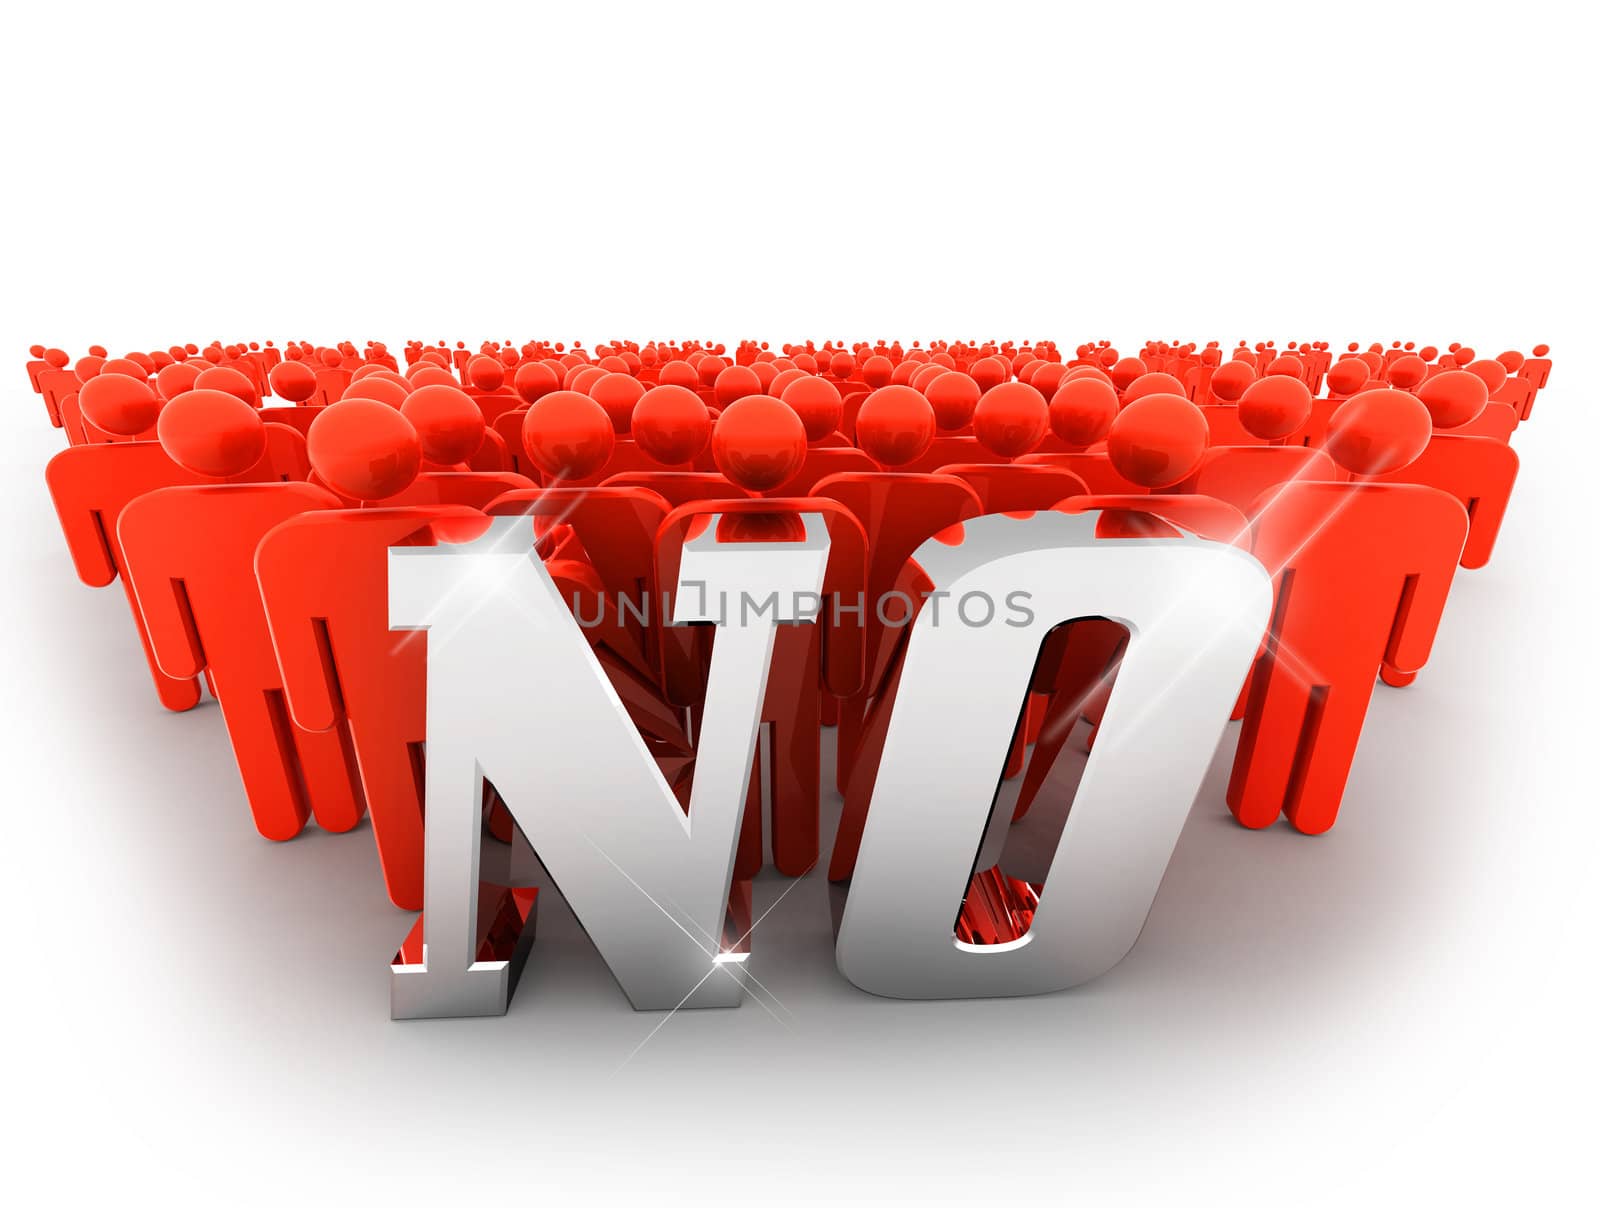 Negative concept represented by a group of people behind the word NO. Includes clipping path